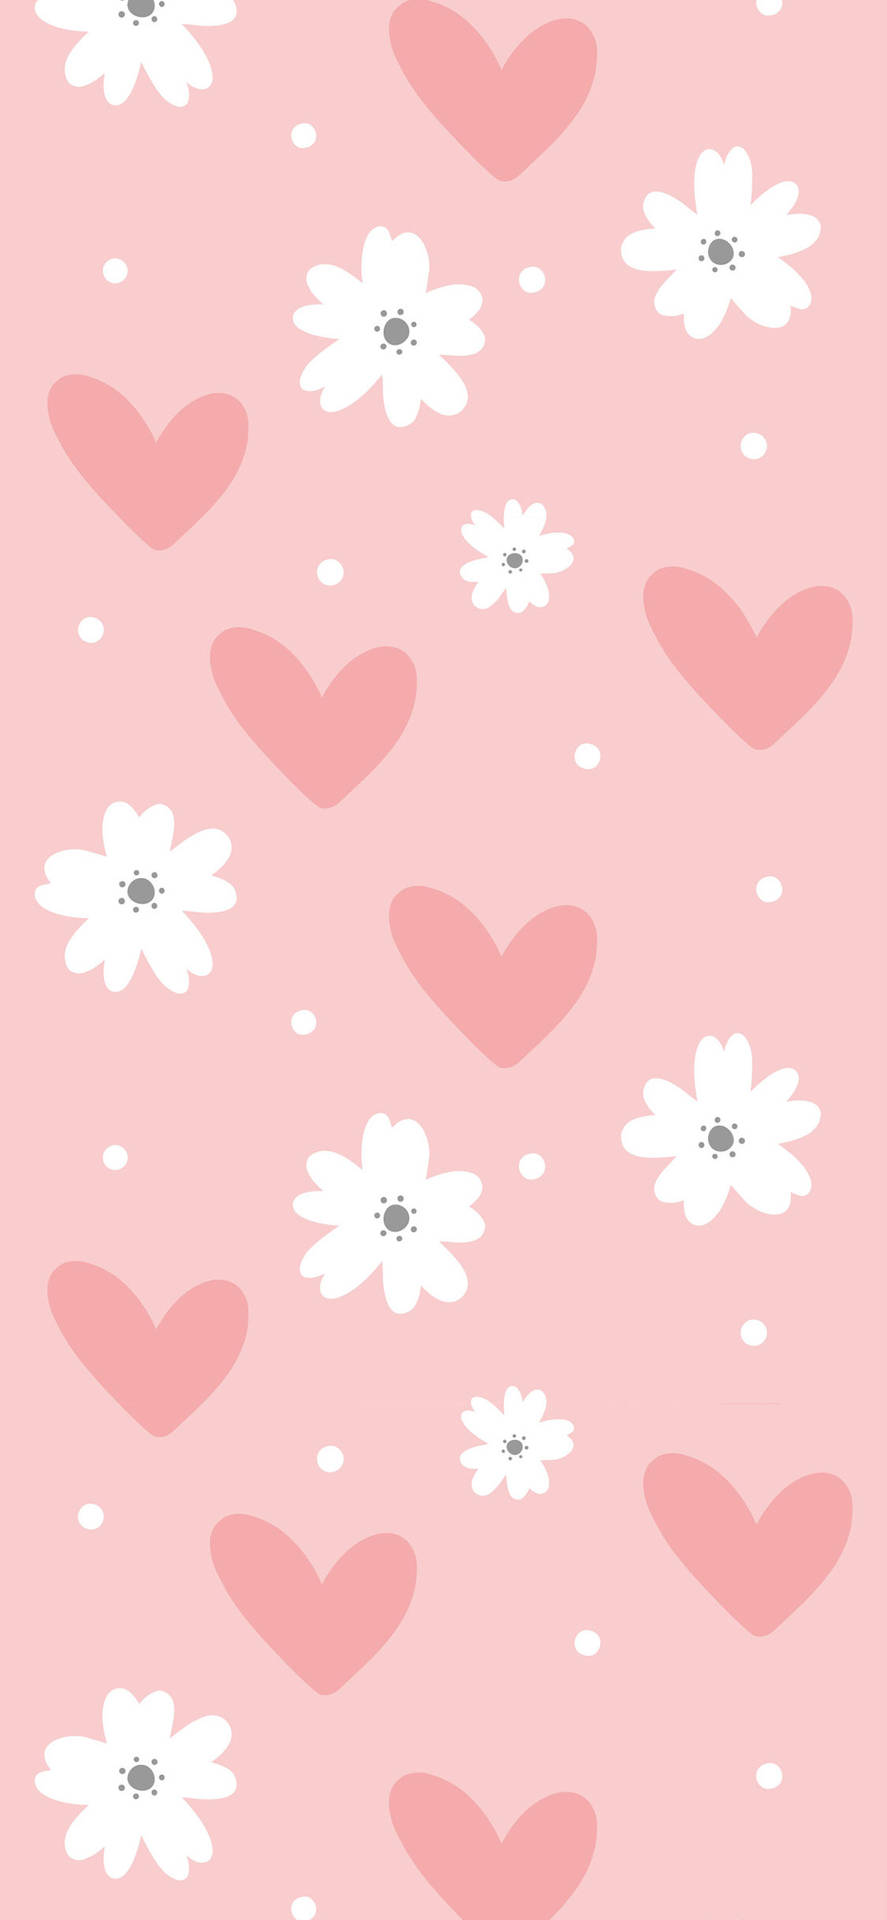 Hearts And Flowers Girly Iphone